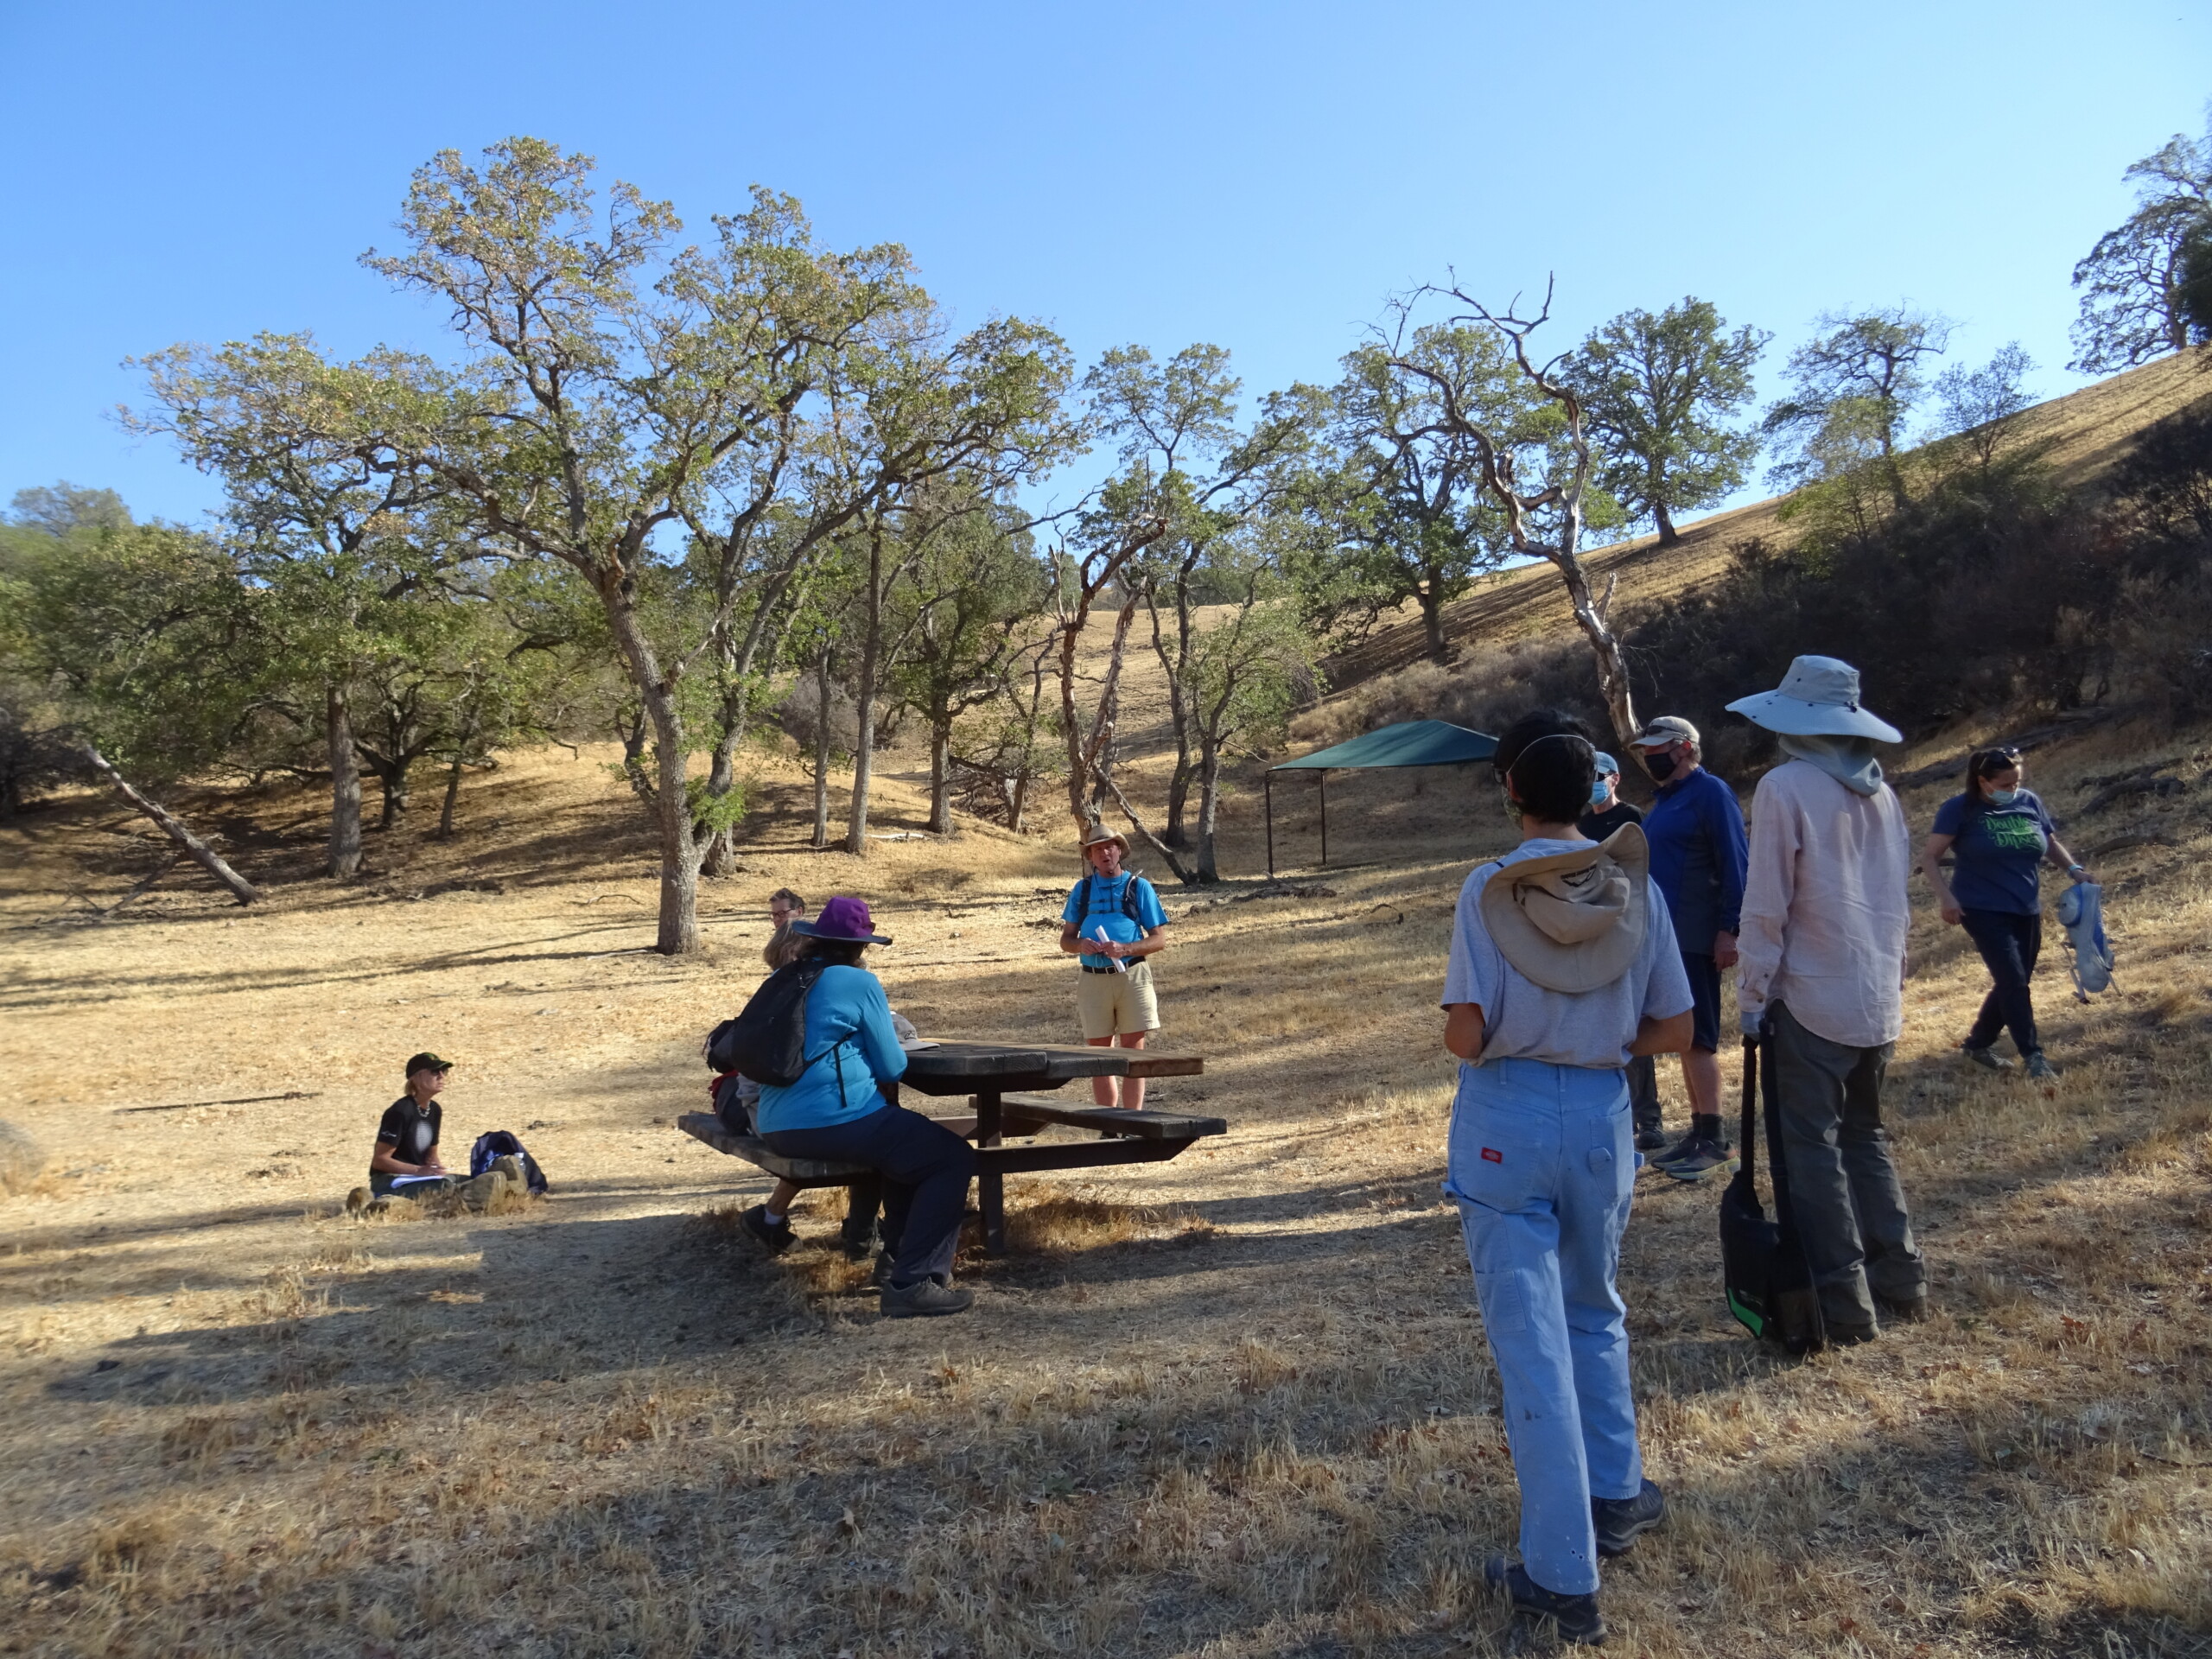 People gathered around picnic table and shade structure at Mangini Ranch